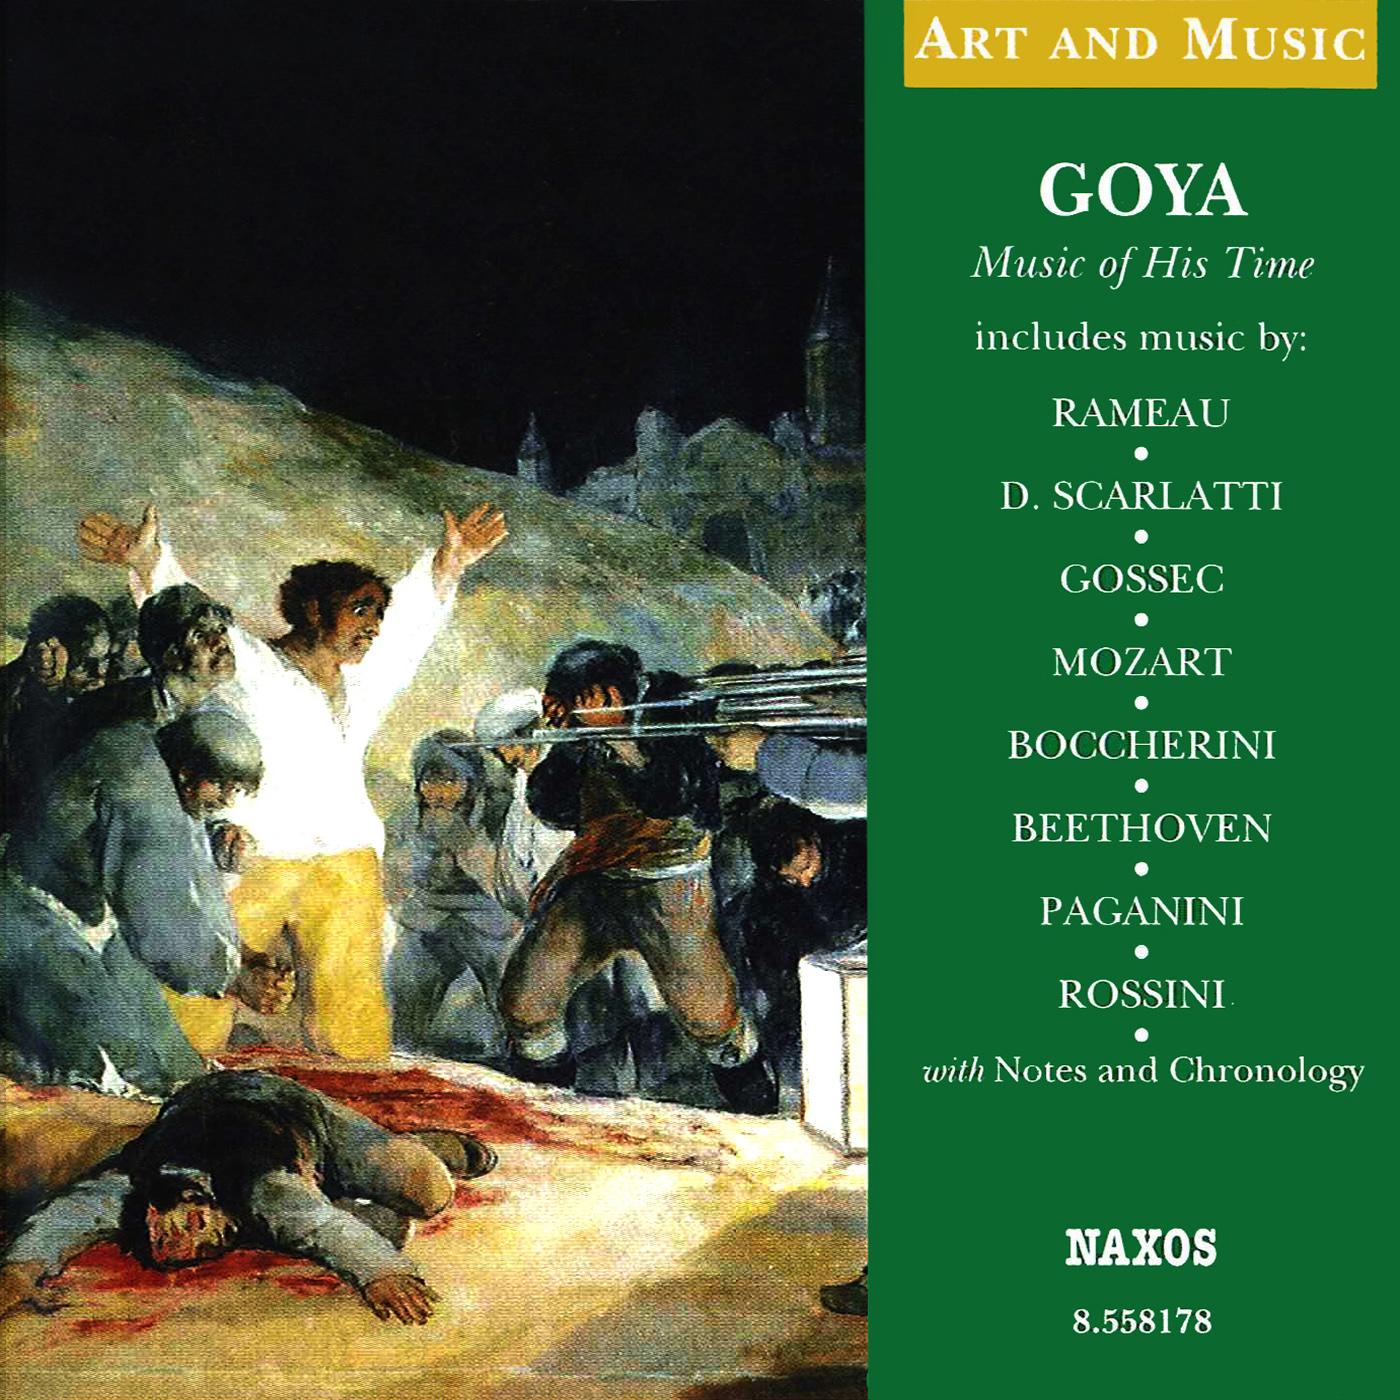 Art and Music: Goya - Music of His Time